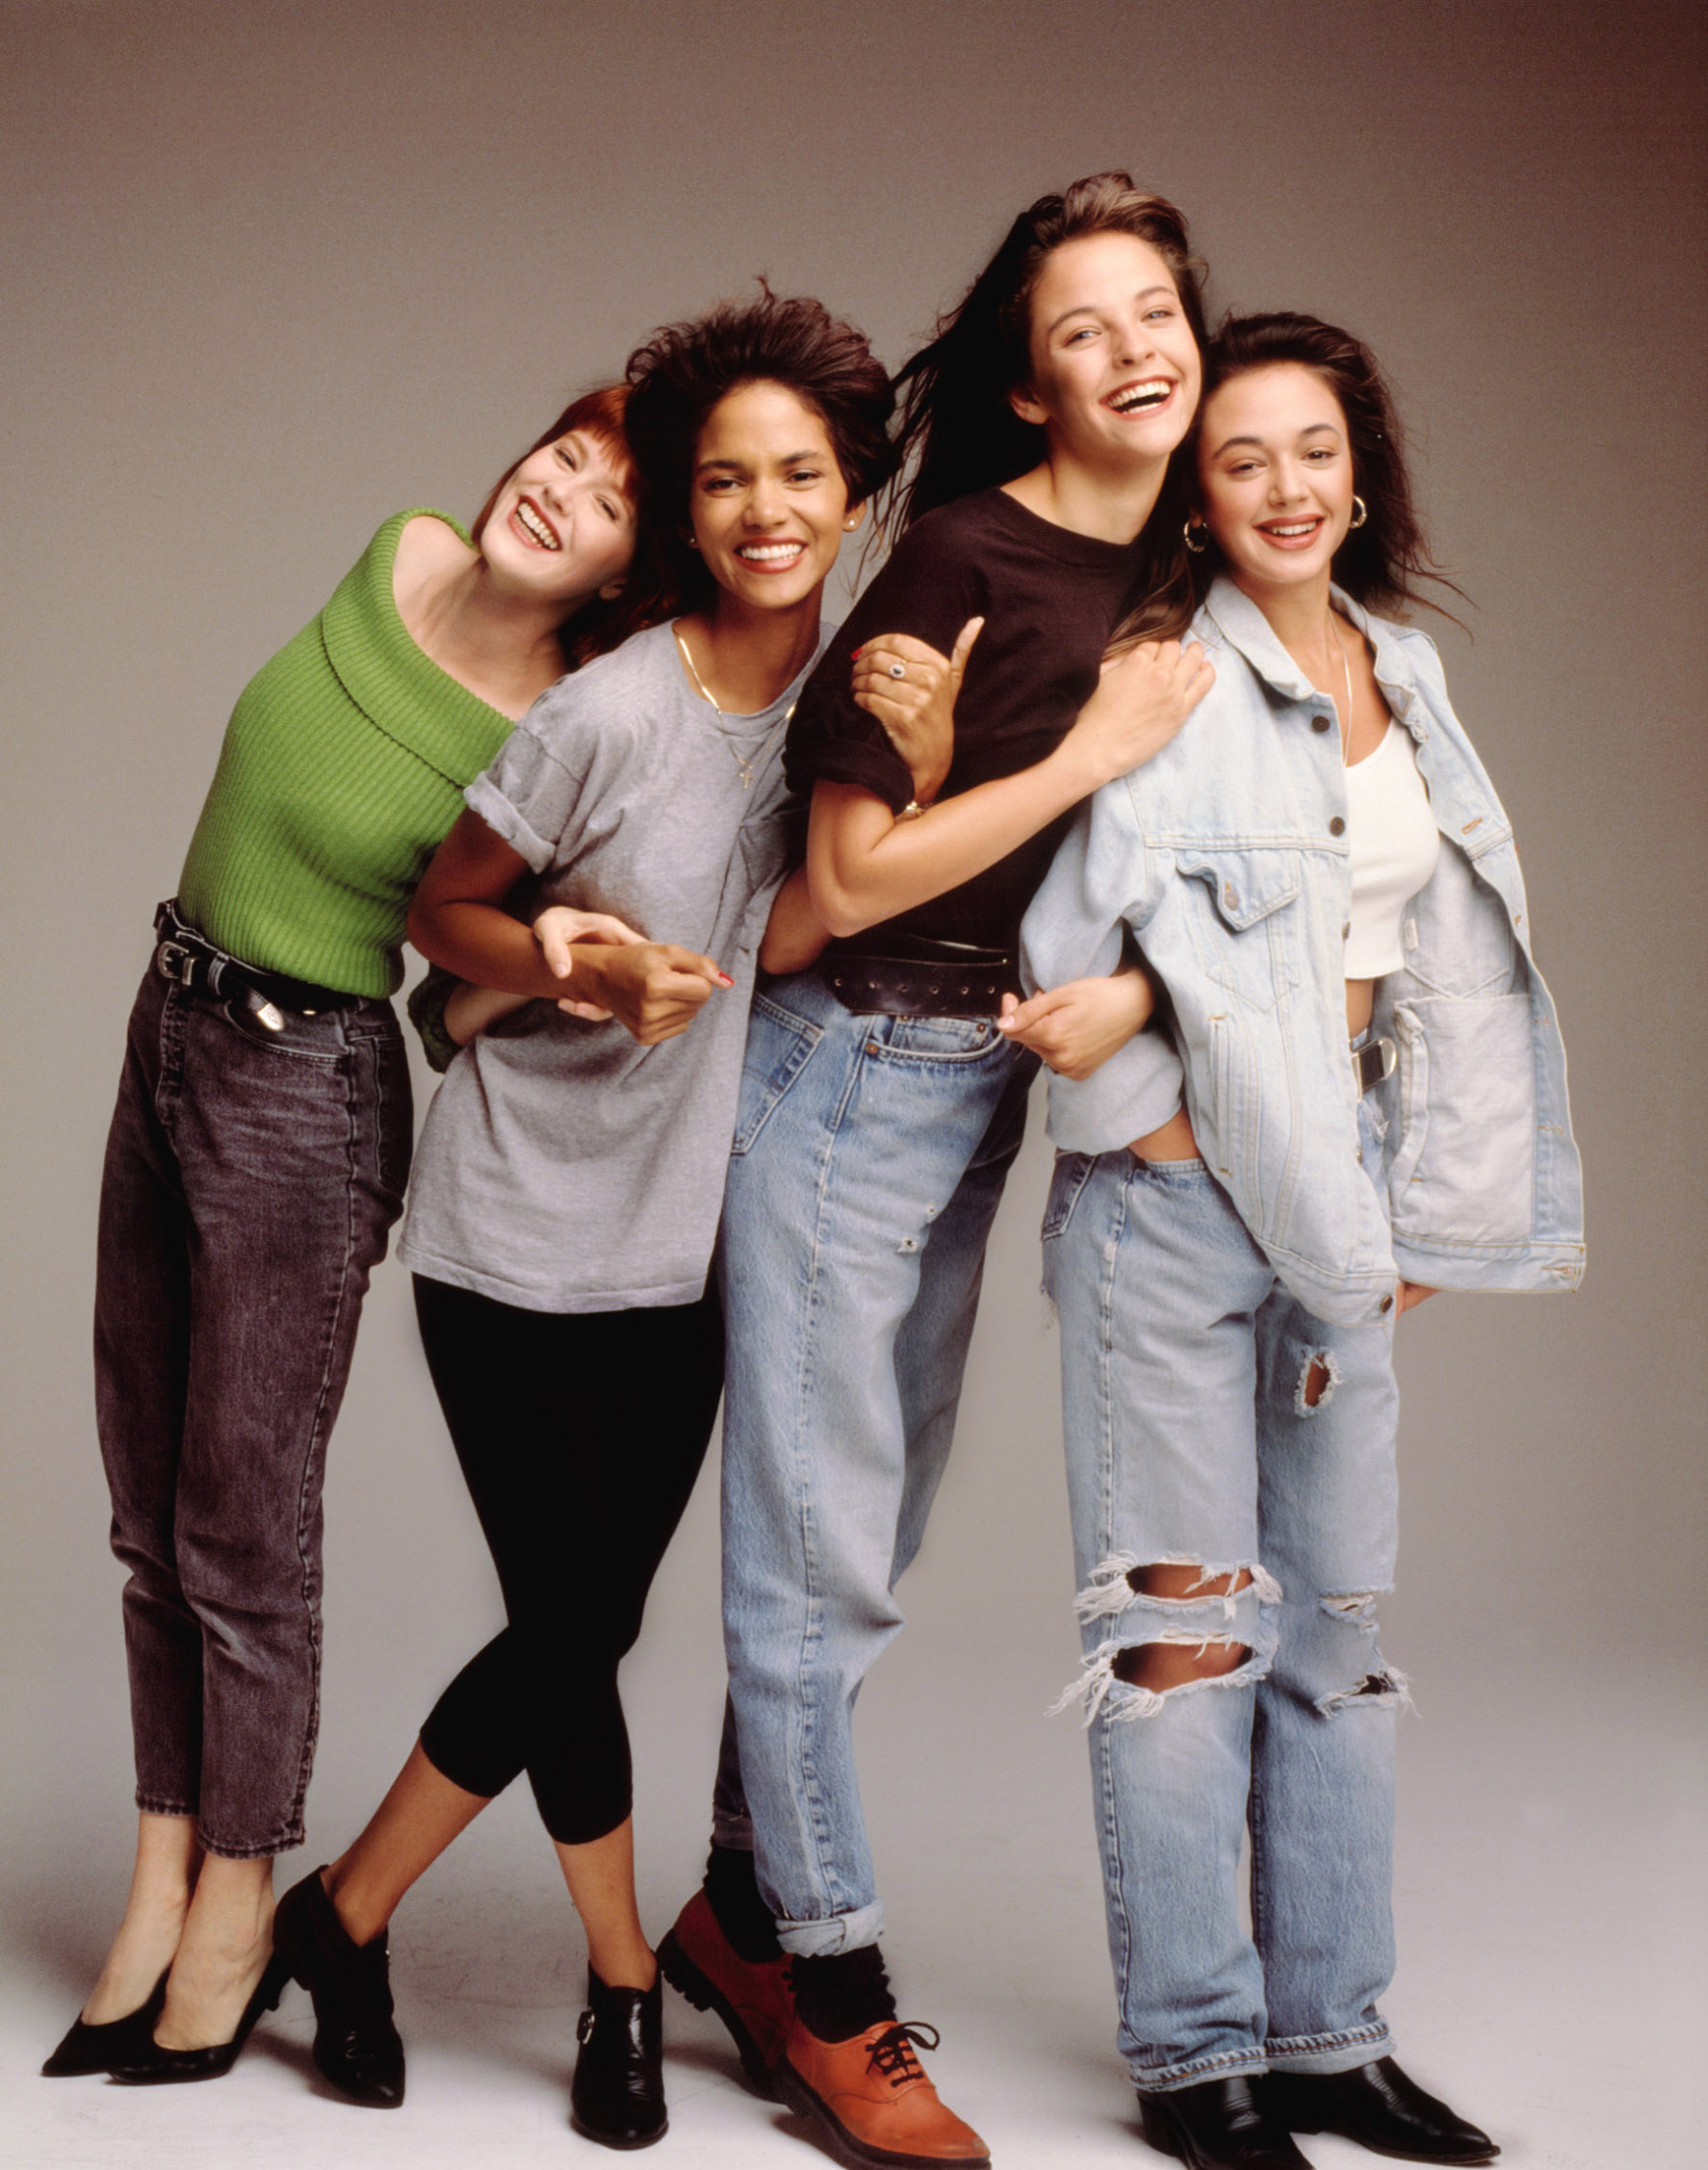 LIVING DOLLS, Deborah Tucker, Halle Berry, Allison Elliot, Leah Remini (l-r), 1989,Image: 98370056, License: Rights-managed, Restrictions: For usage credit please use; Courtesy Everett Collection, Model Release: no, Credit line: Courtesy Everett Collection / Everett / Profimedia